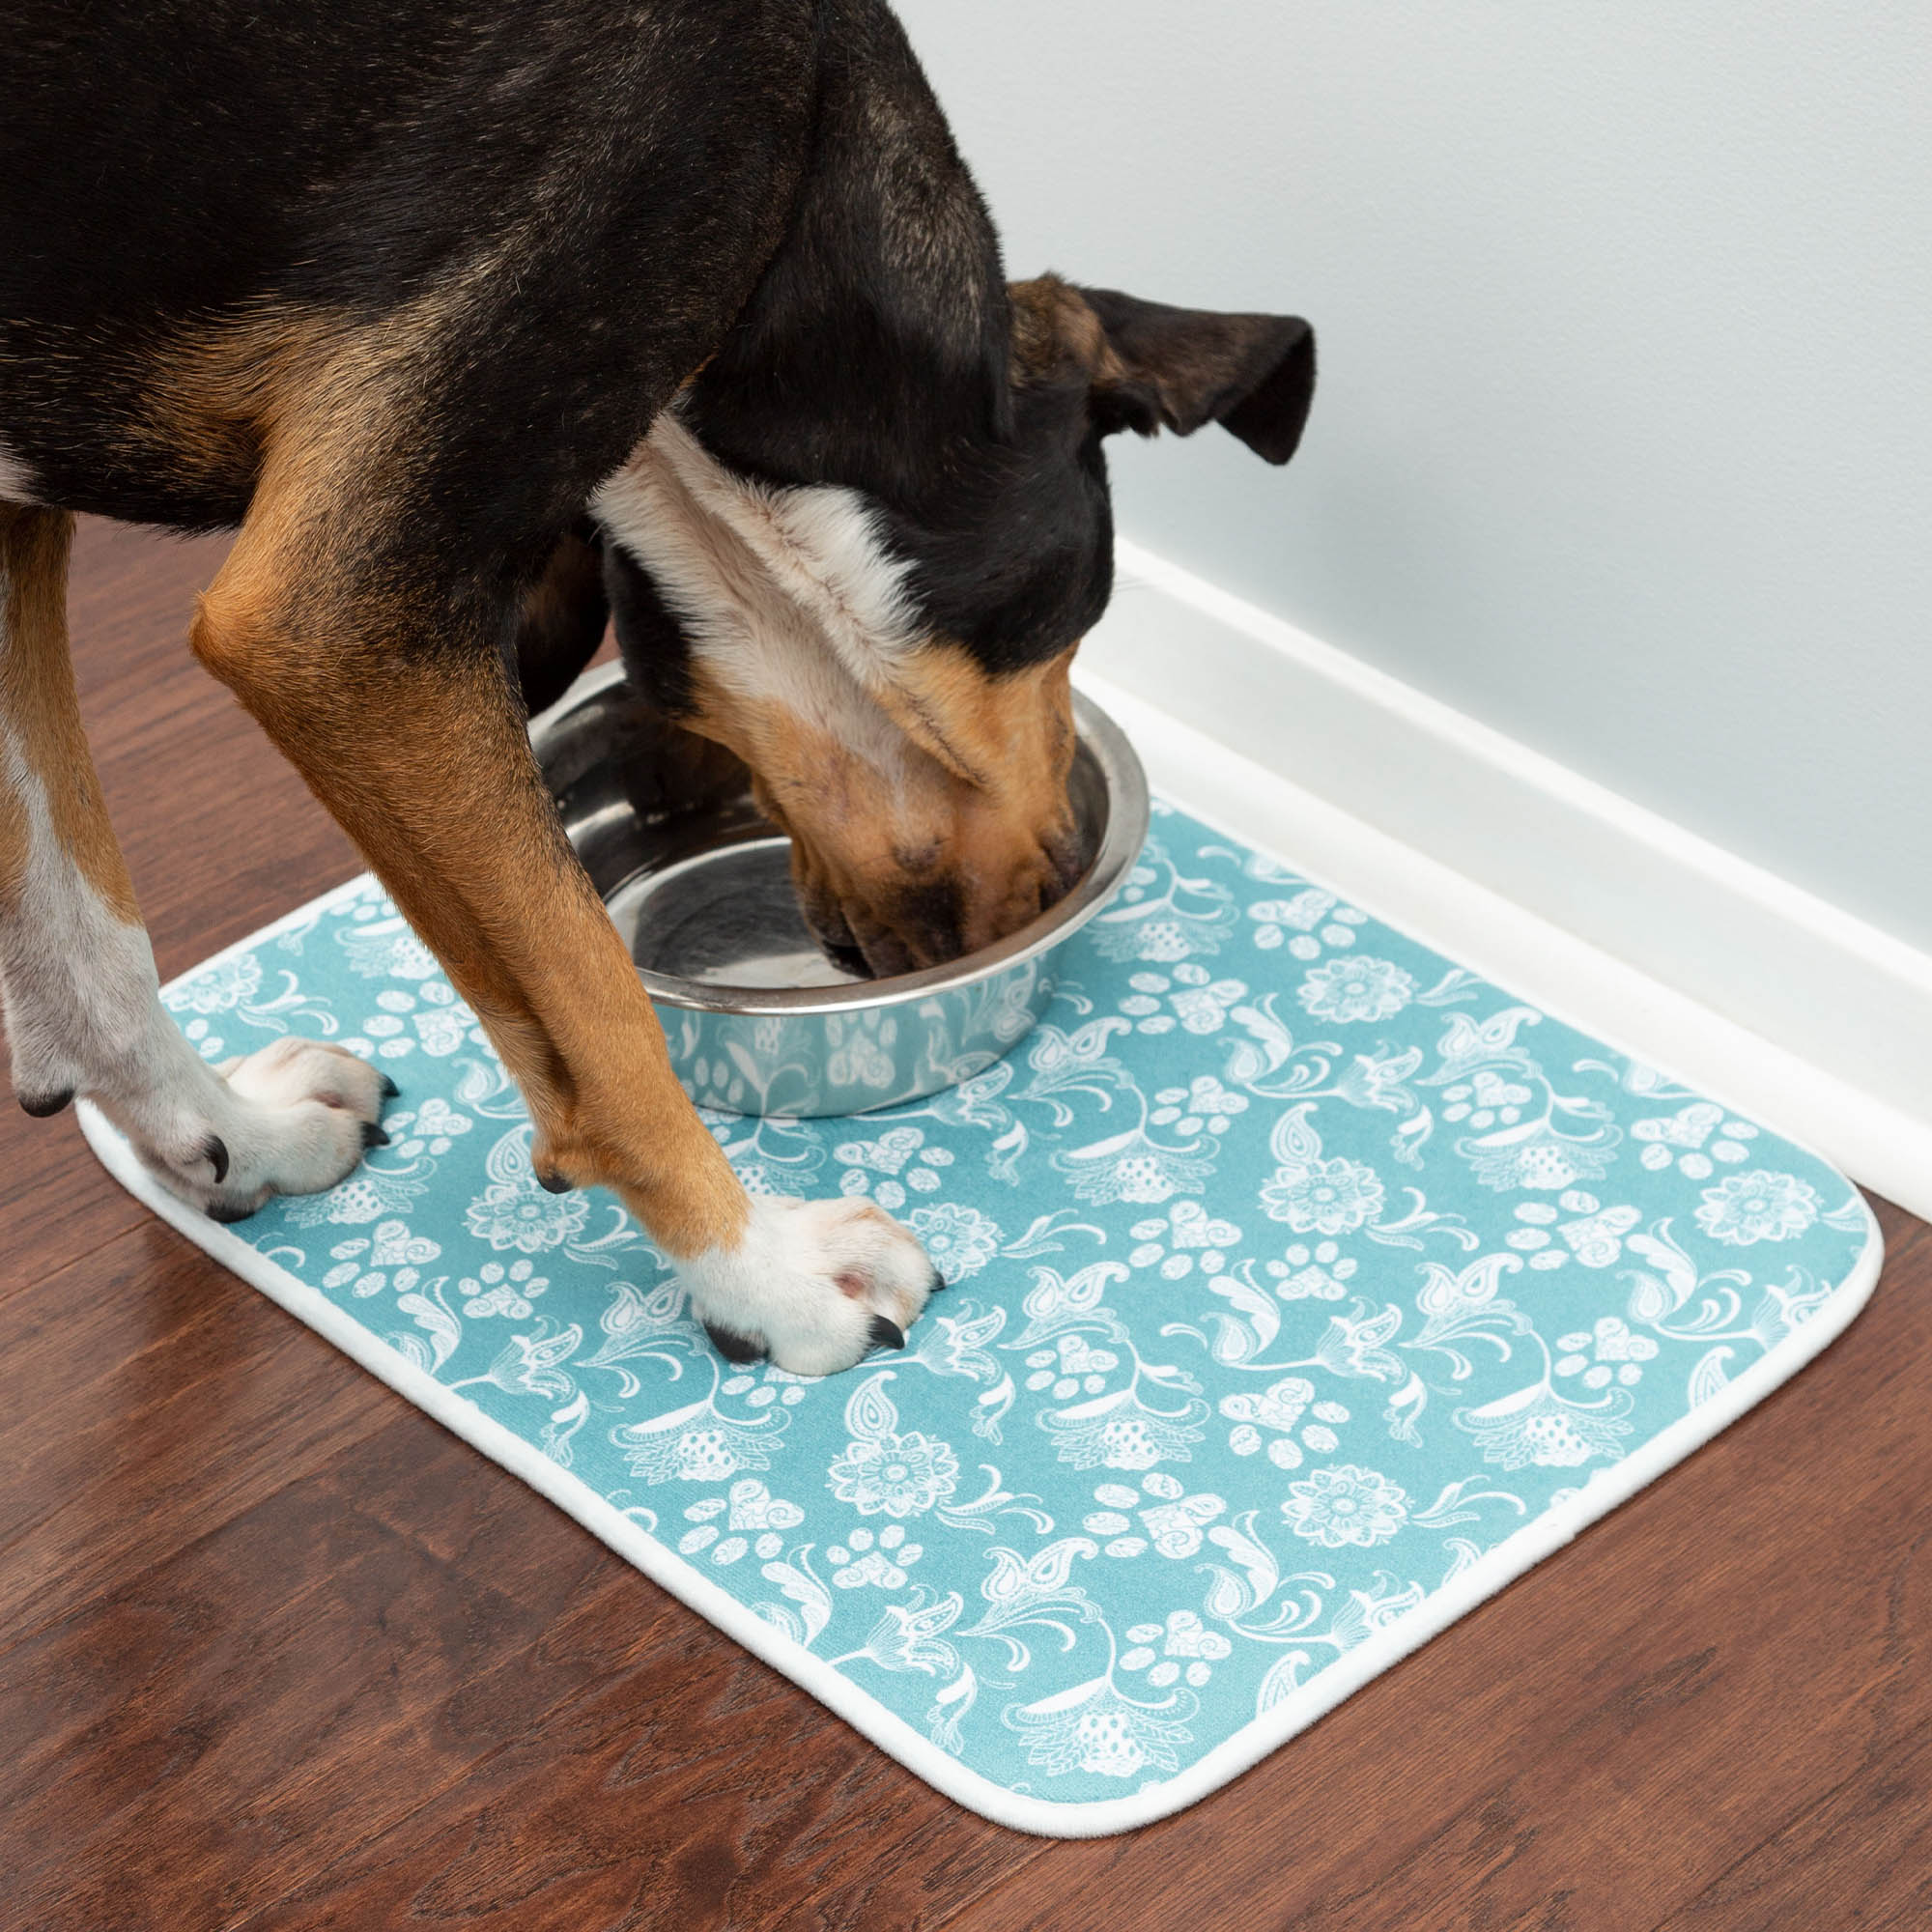 Messy Paws Absorbent Pet Dish Mat - Red Paisley Paws